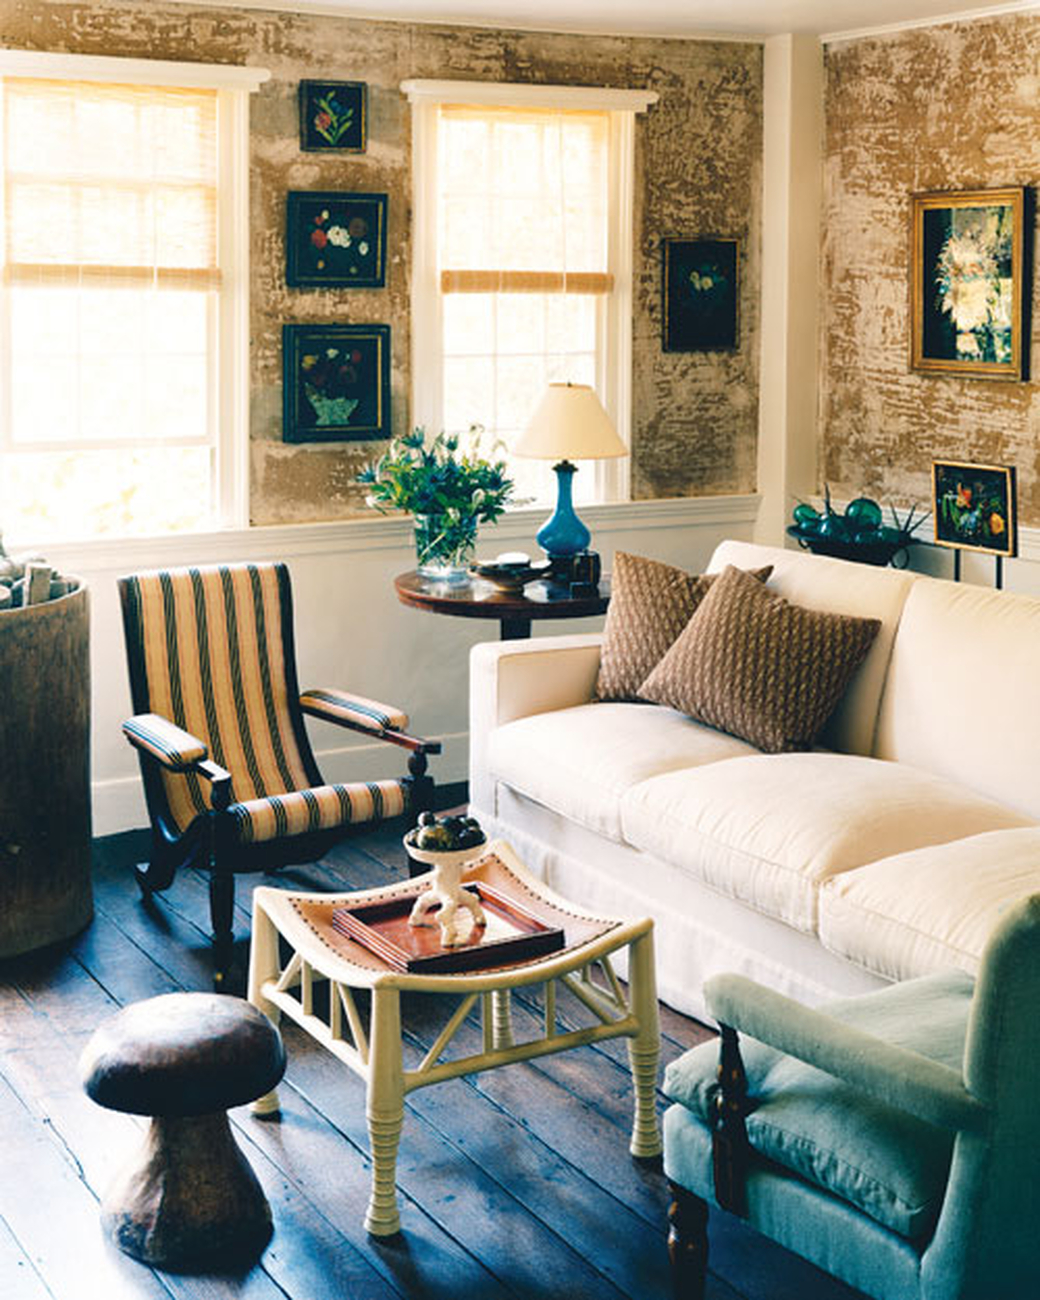 Country Cottage Chic by Angus Wilkie | Cool Chic Style Fashion